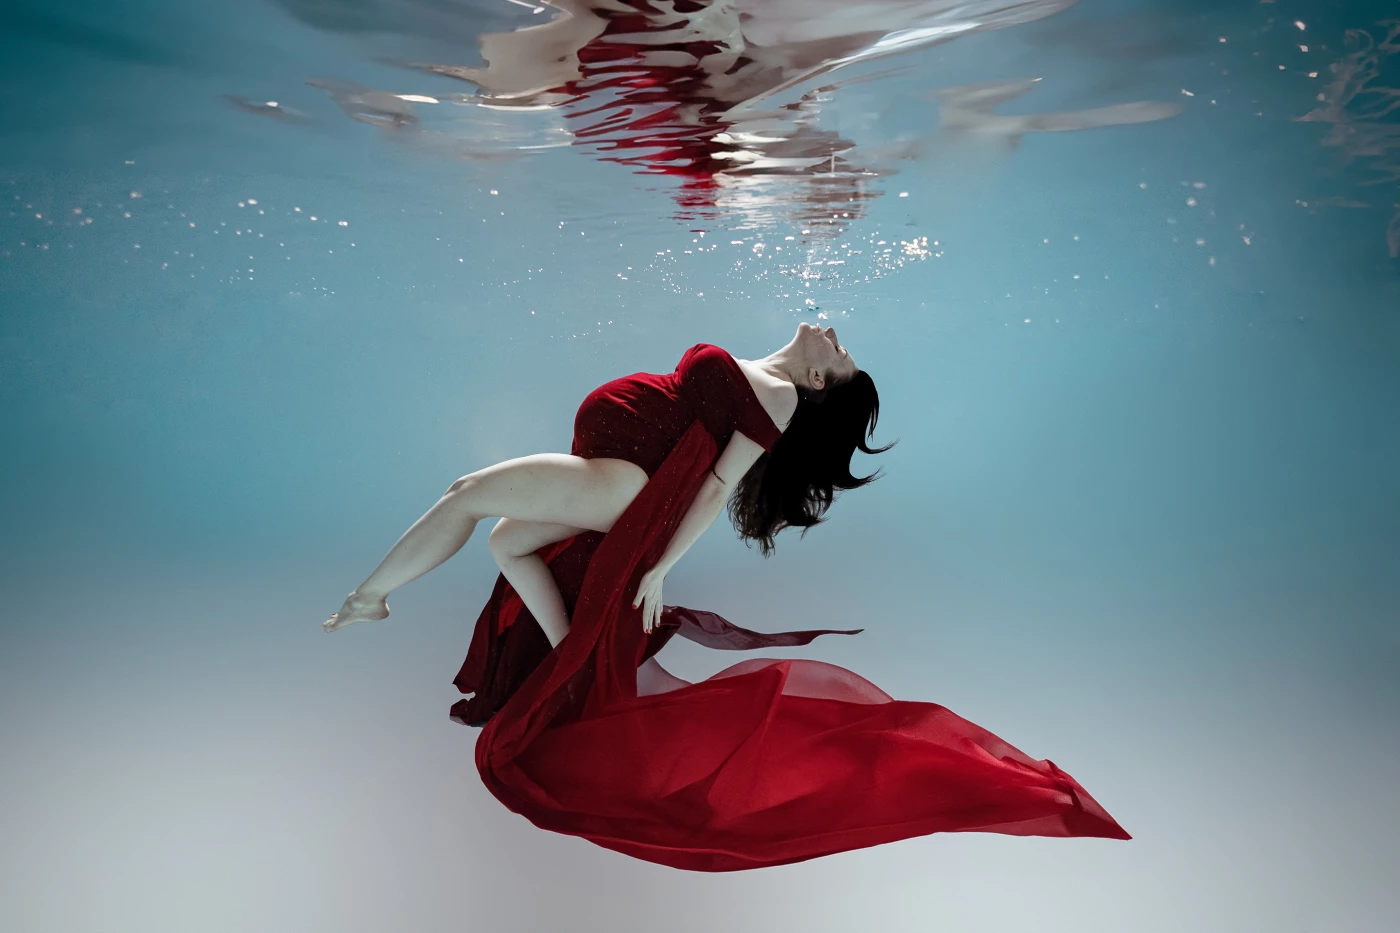 WWeightless, graceful, elegant, and strong are some of the characteristics of underwater photography...